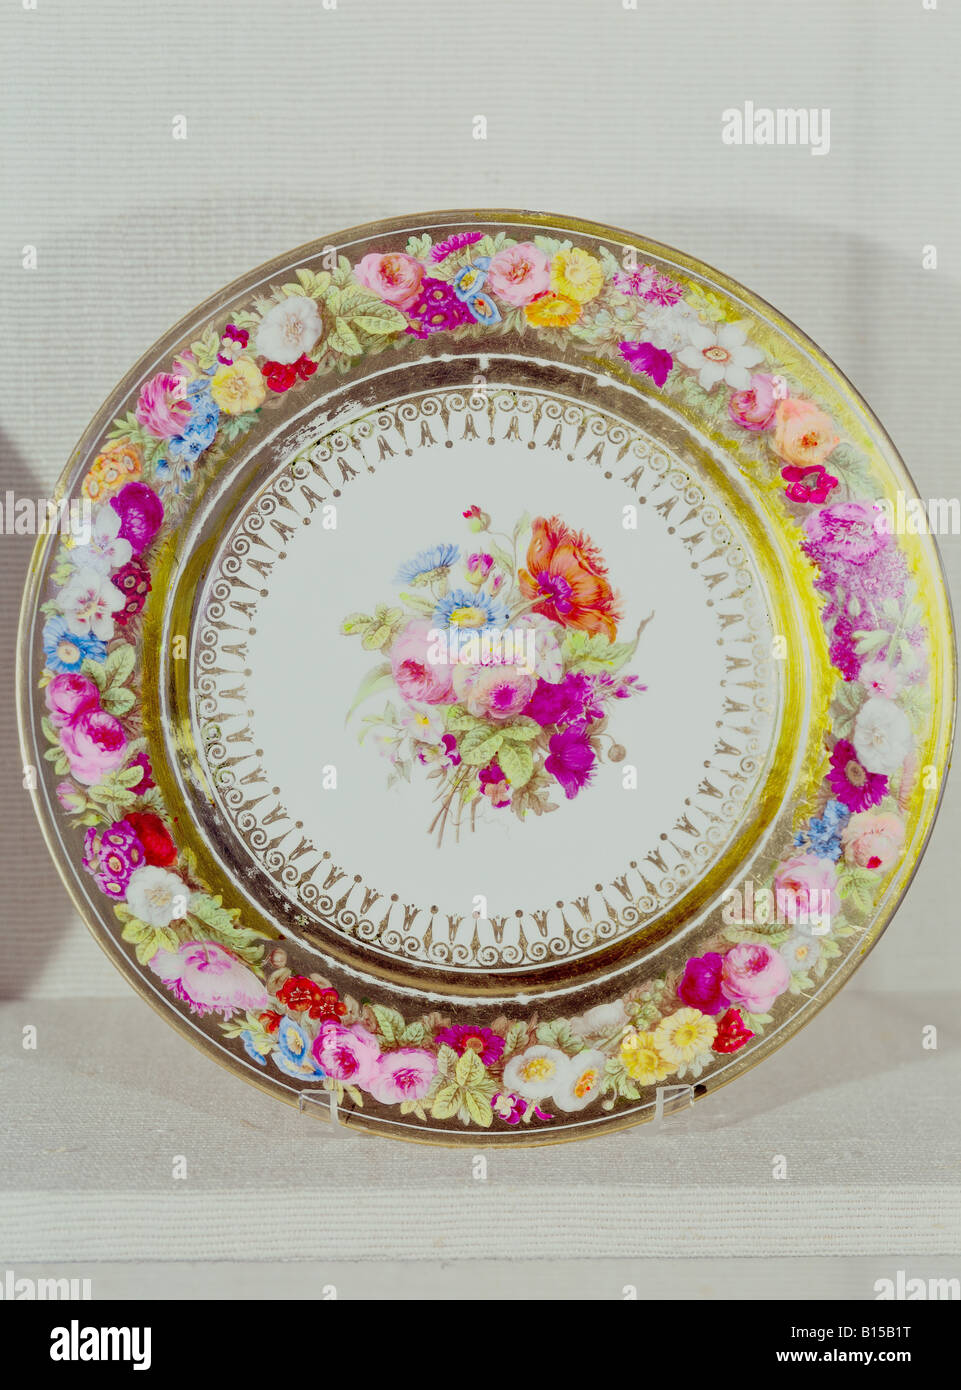 fine arts, porcelain, plate, painted, gold plaiting, flowers, Sevres porcelain manufactory, France, circa 1806 / 1808, Munich Residence, porcelain collection, Artist's Copyright has not to be cleared Stock Photo